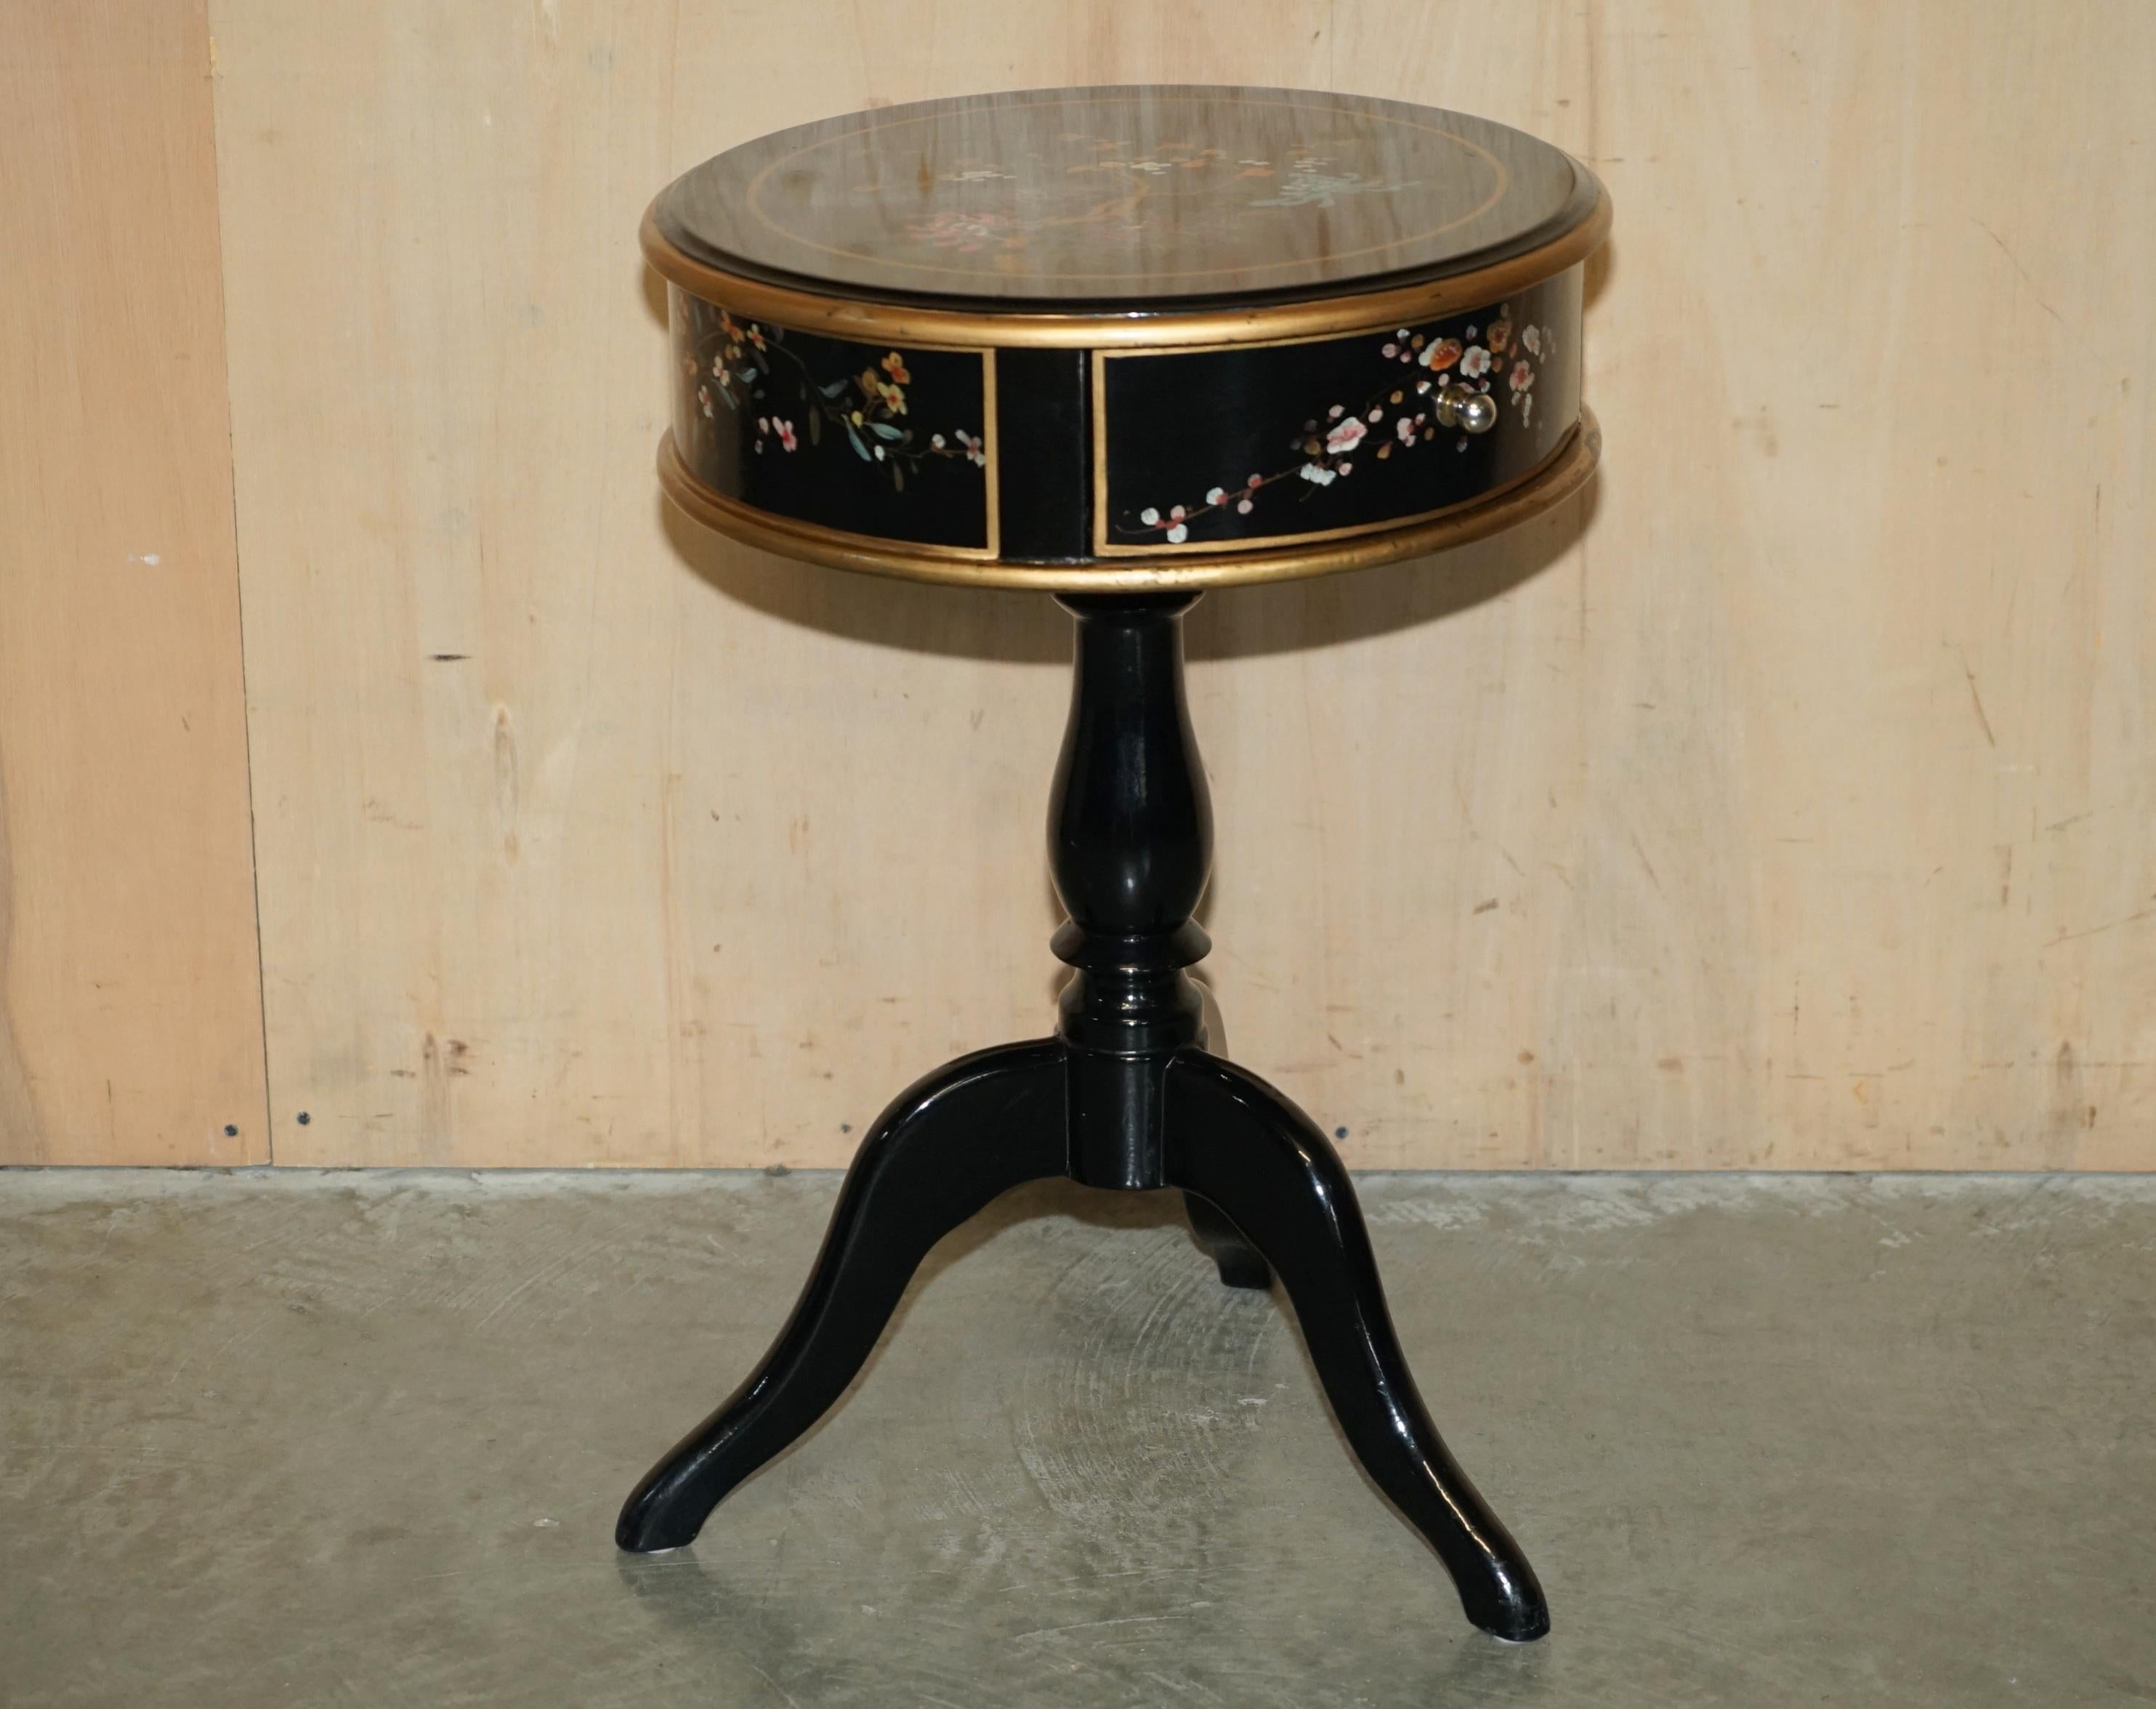 Royal House Antiques

Royal House Antiques is delighted to offer for sale this very nicely made Chinese Chinoiserie style side end table with hand painted finish 

Please note the delivery fee listed is just a guide, it covers within the M25 only